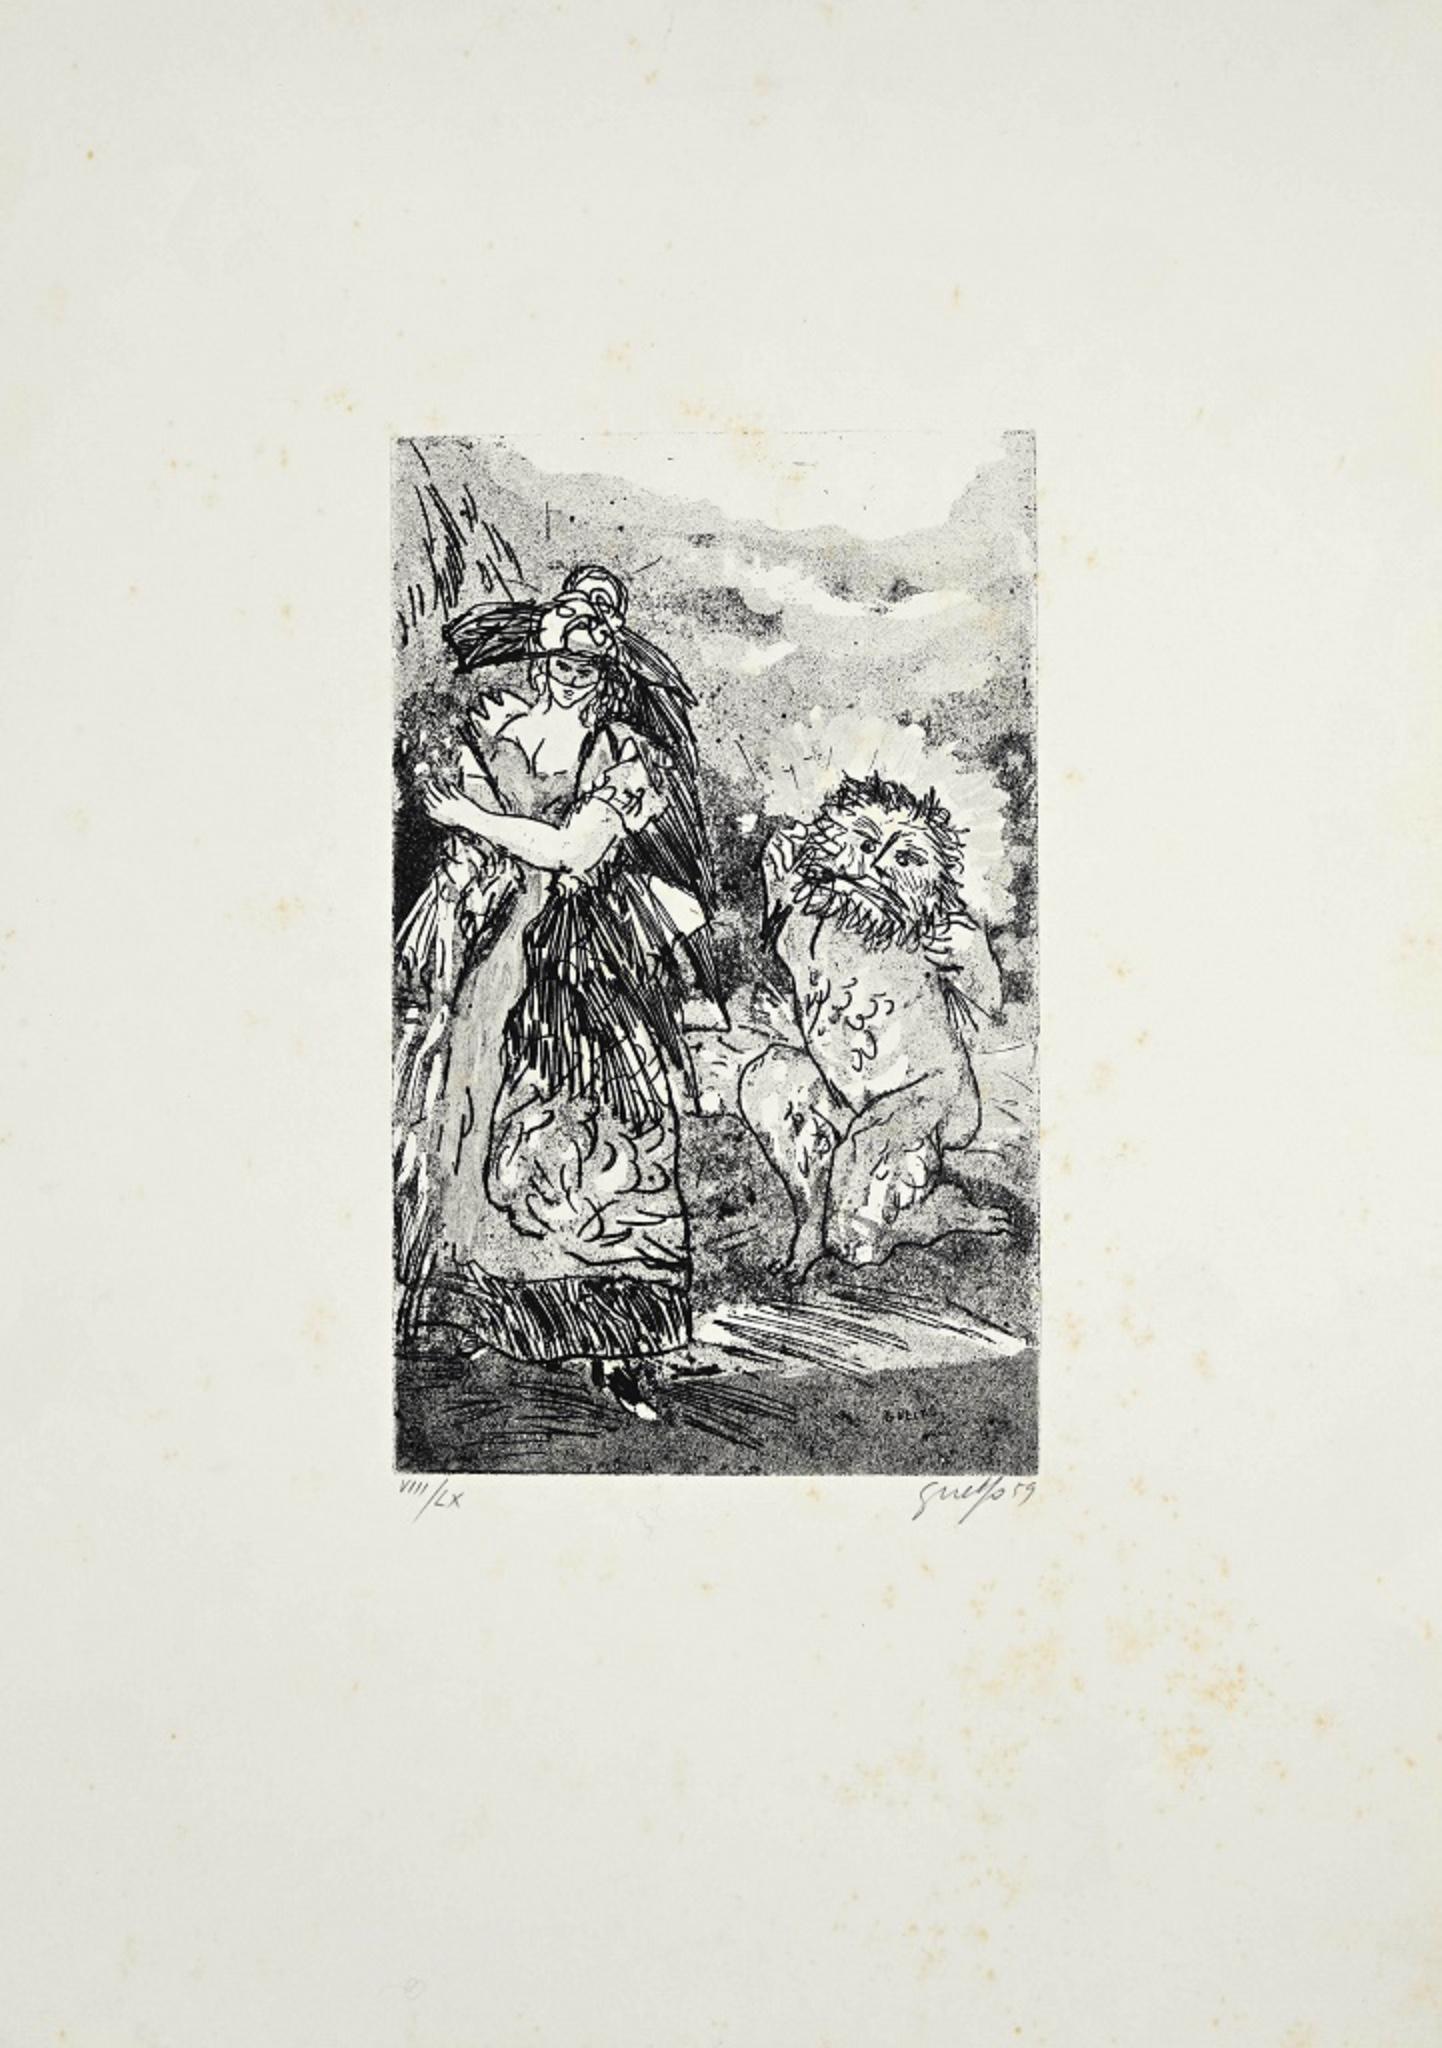 True and False Masks is an original etching realized by Guelfo Bianchini in 1959.

The artwork is hand-signed by the artist on the lower right corner, and numbered (8/60) on the lower left corner.

In very good conditions and mounted on a white